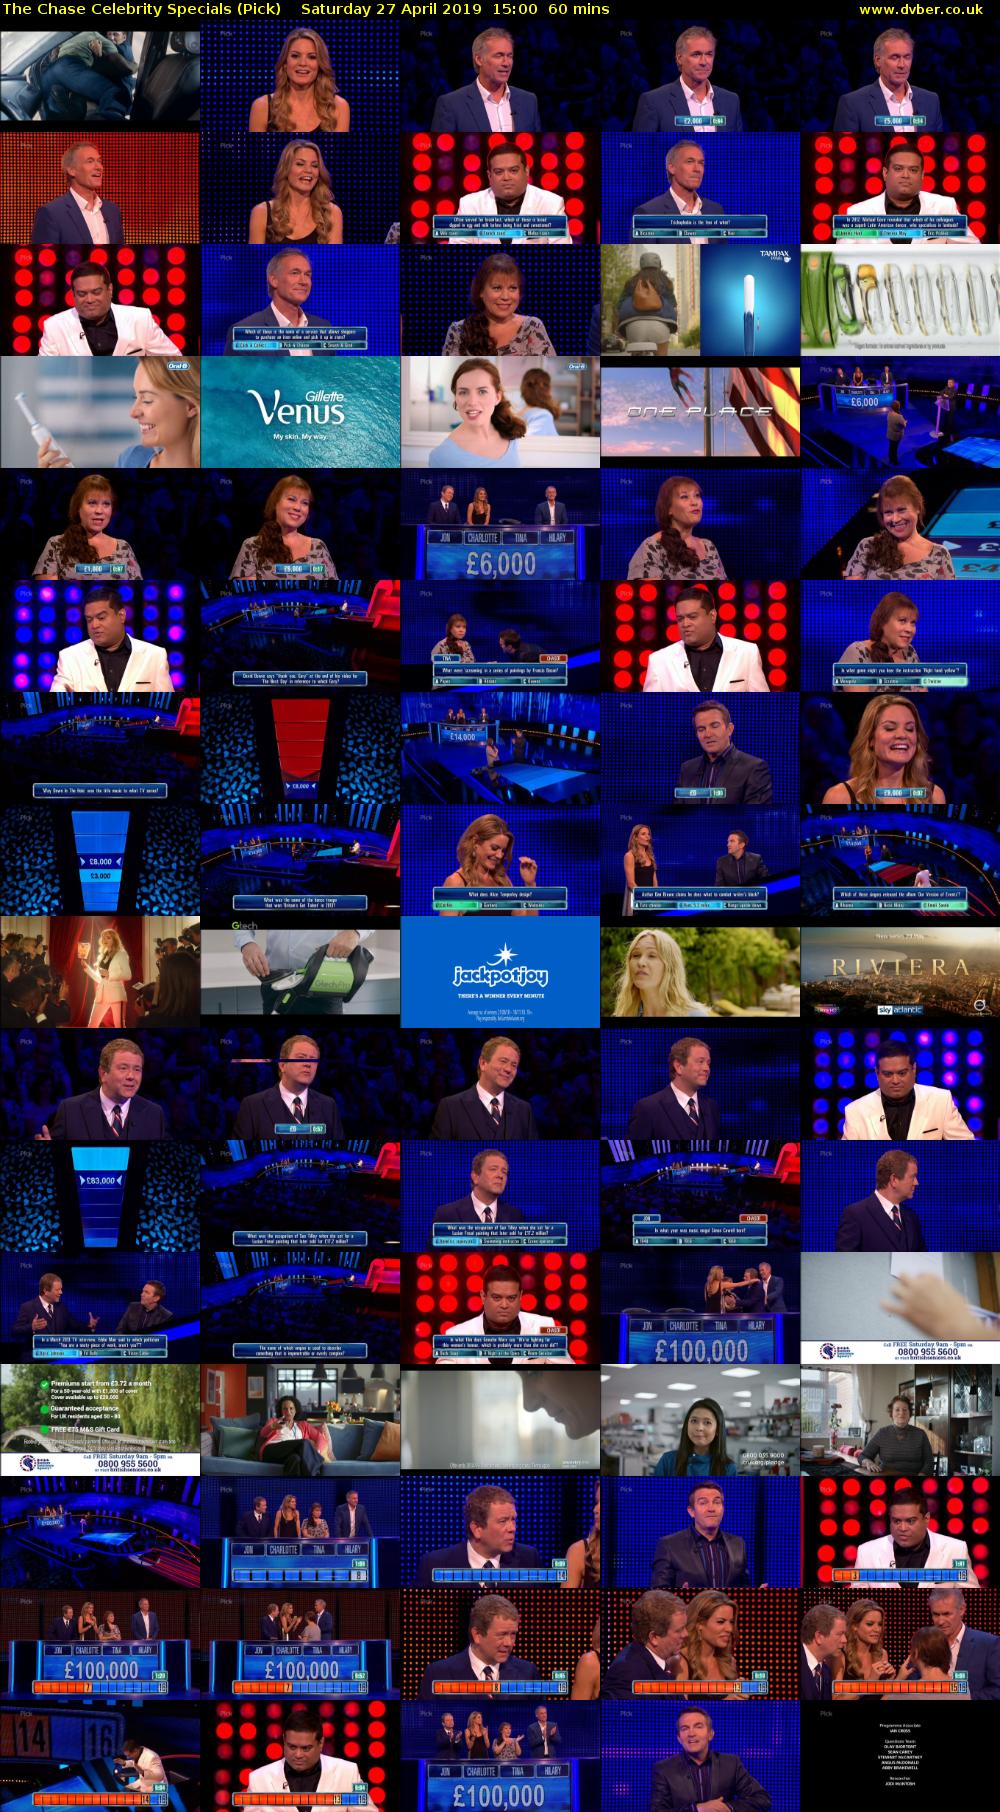 The Chase Celebrity Specials (Pick) Saturday 27 April 2019 15:00 - 16:00